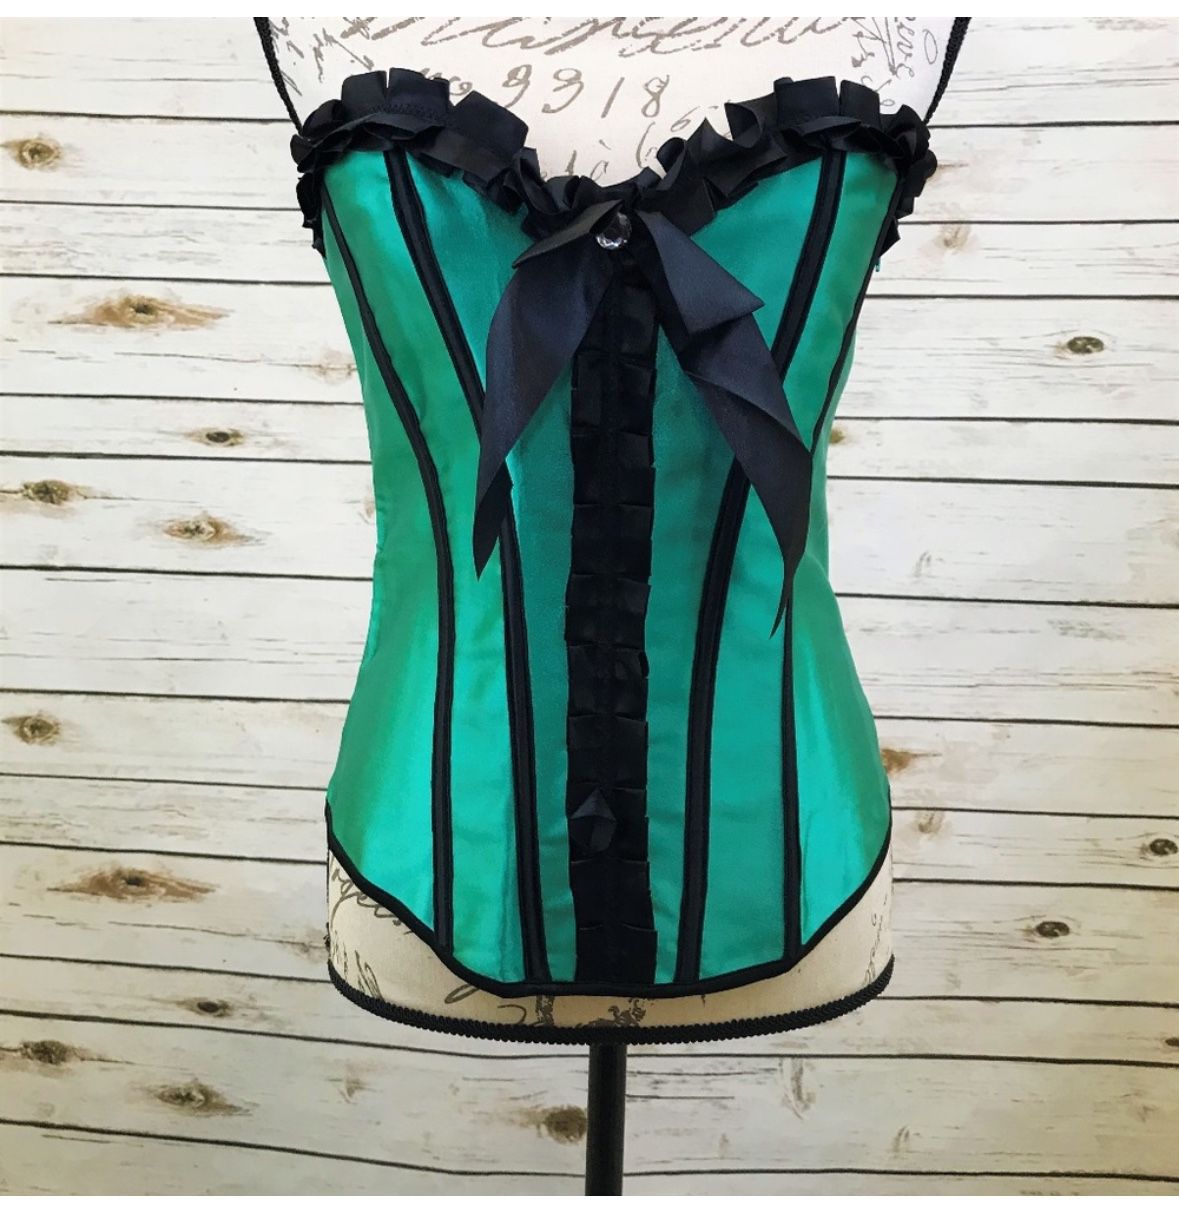 Green Corset New - Size S